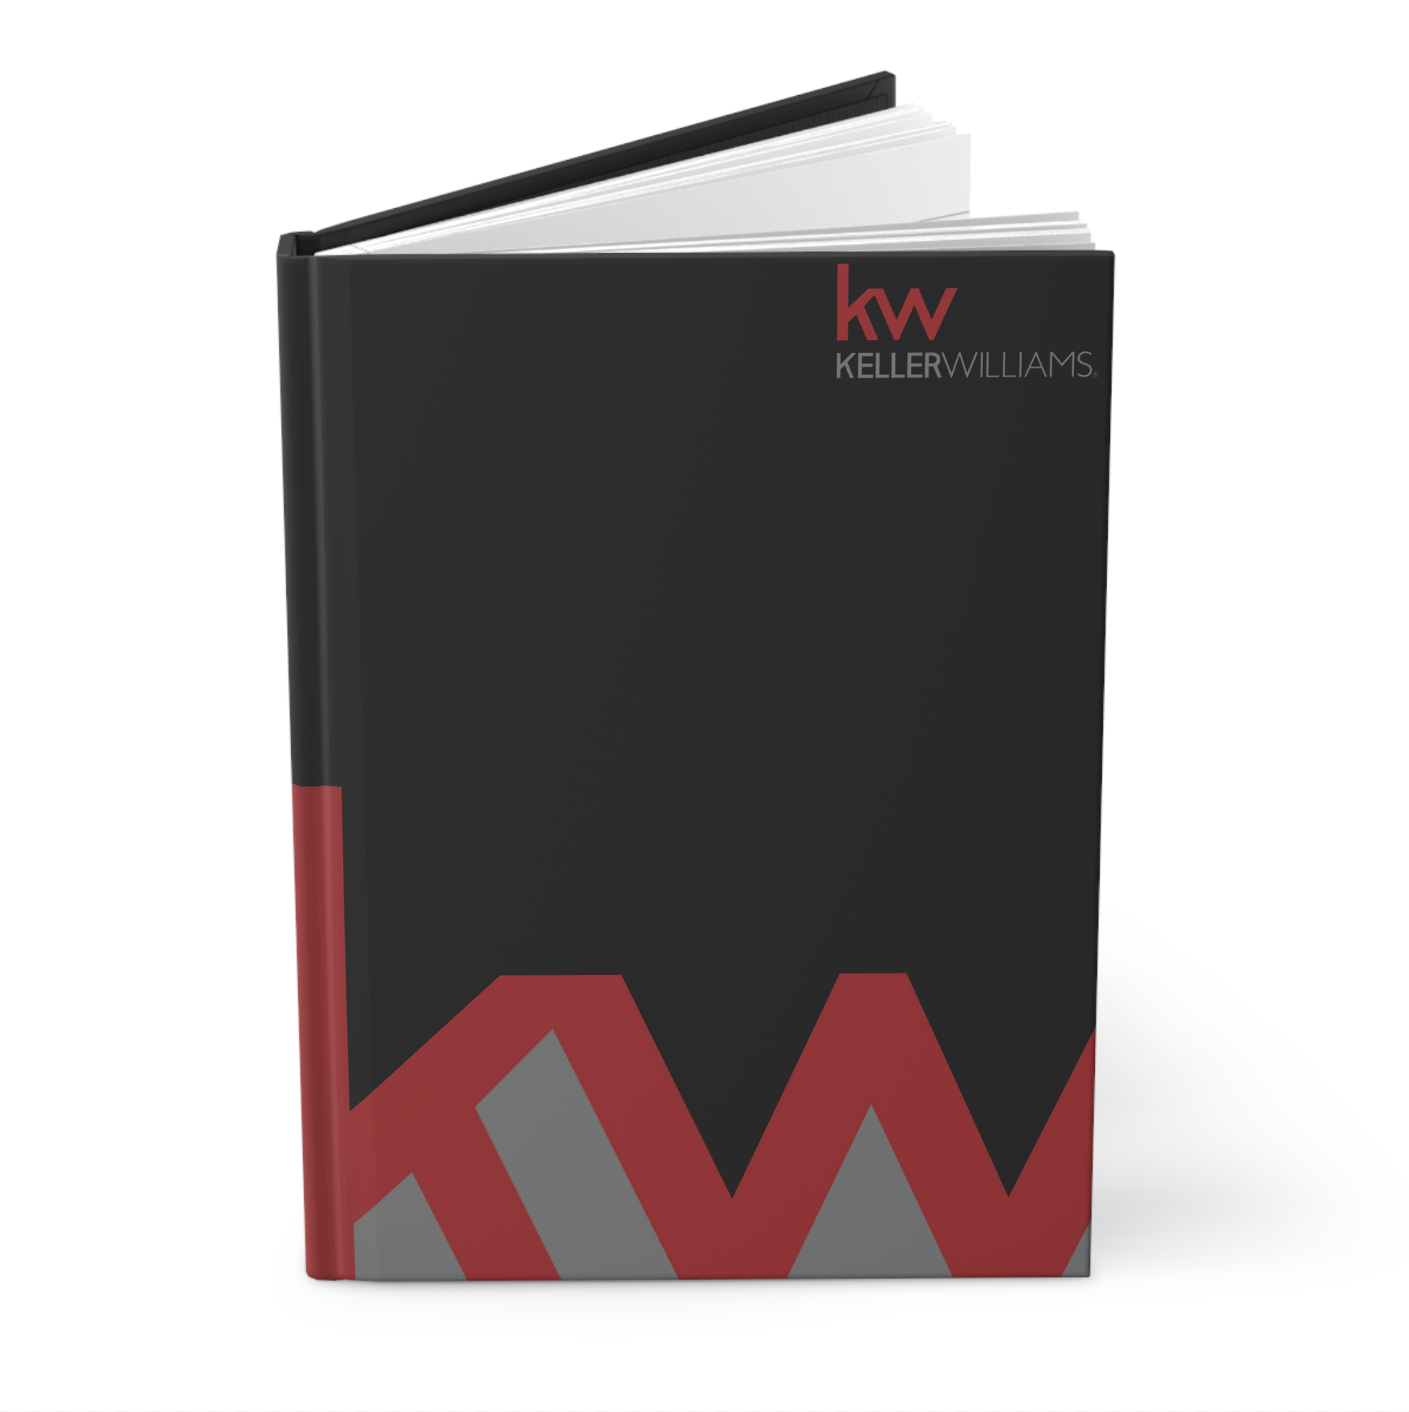 KW Full Color Hardcover Binders Black KW Monogram (from as low as $10.46 per cover)